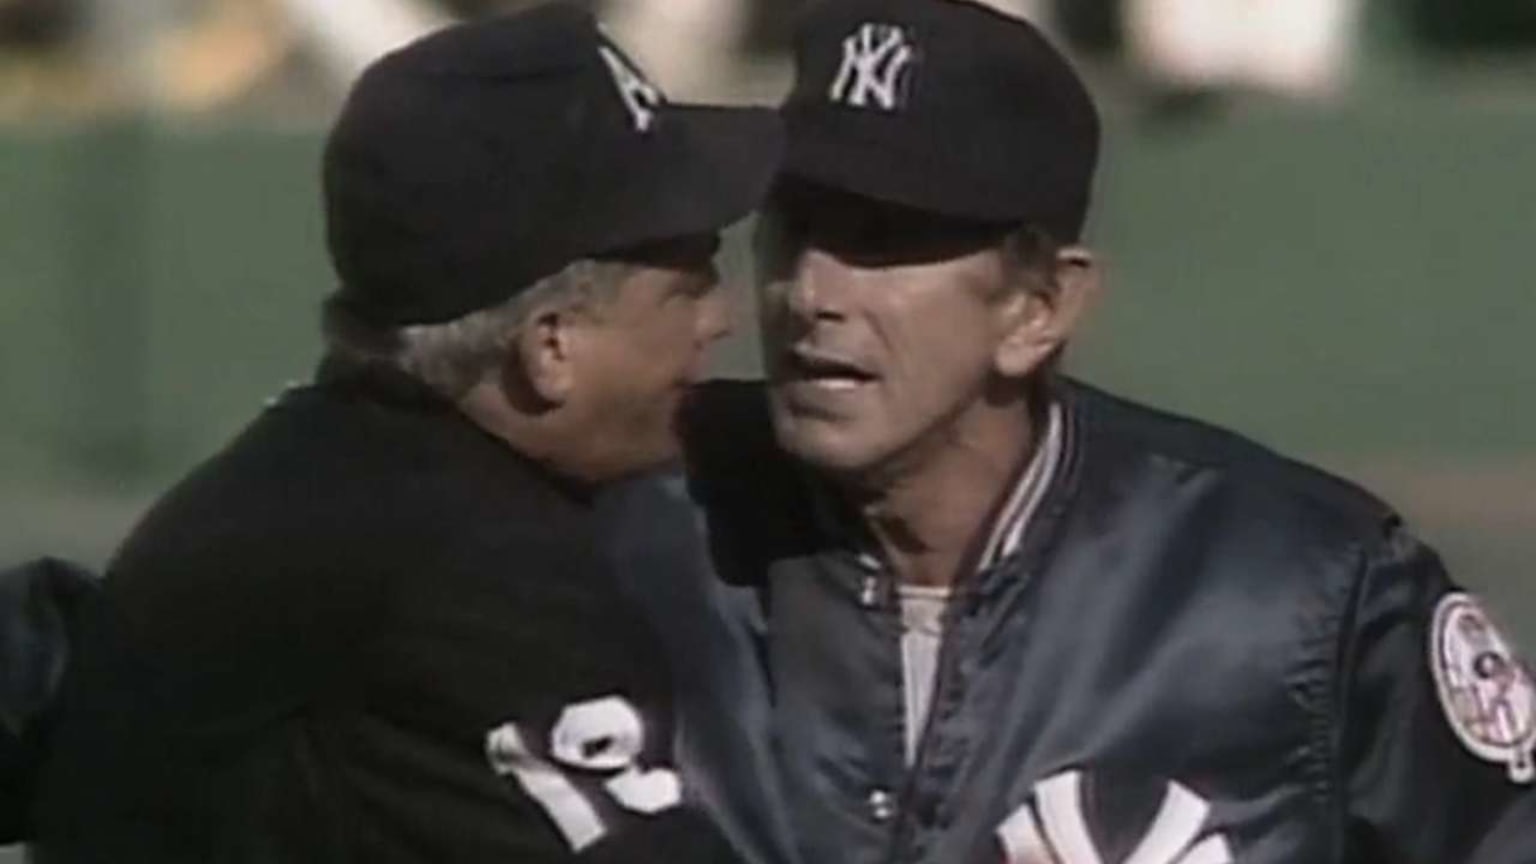 Billy Martin's ejection